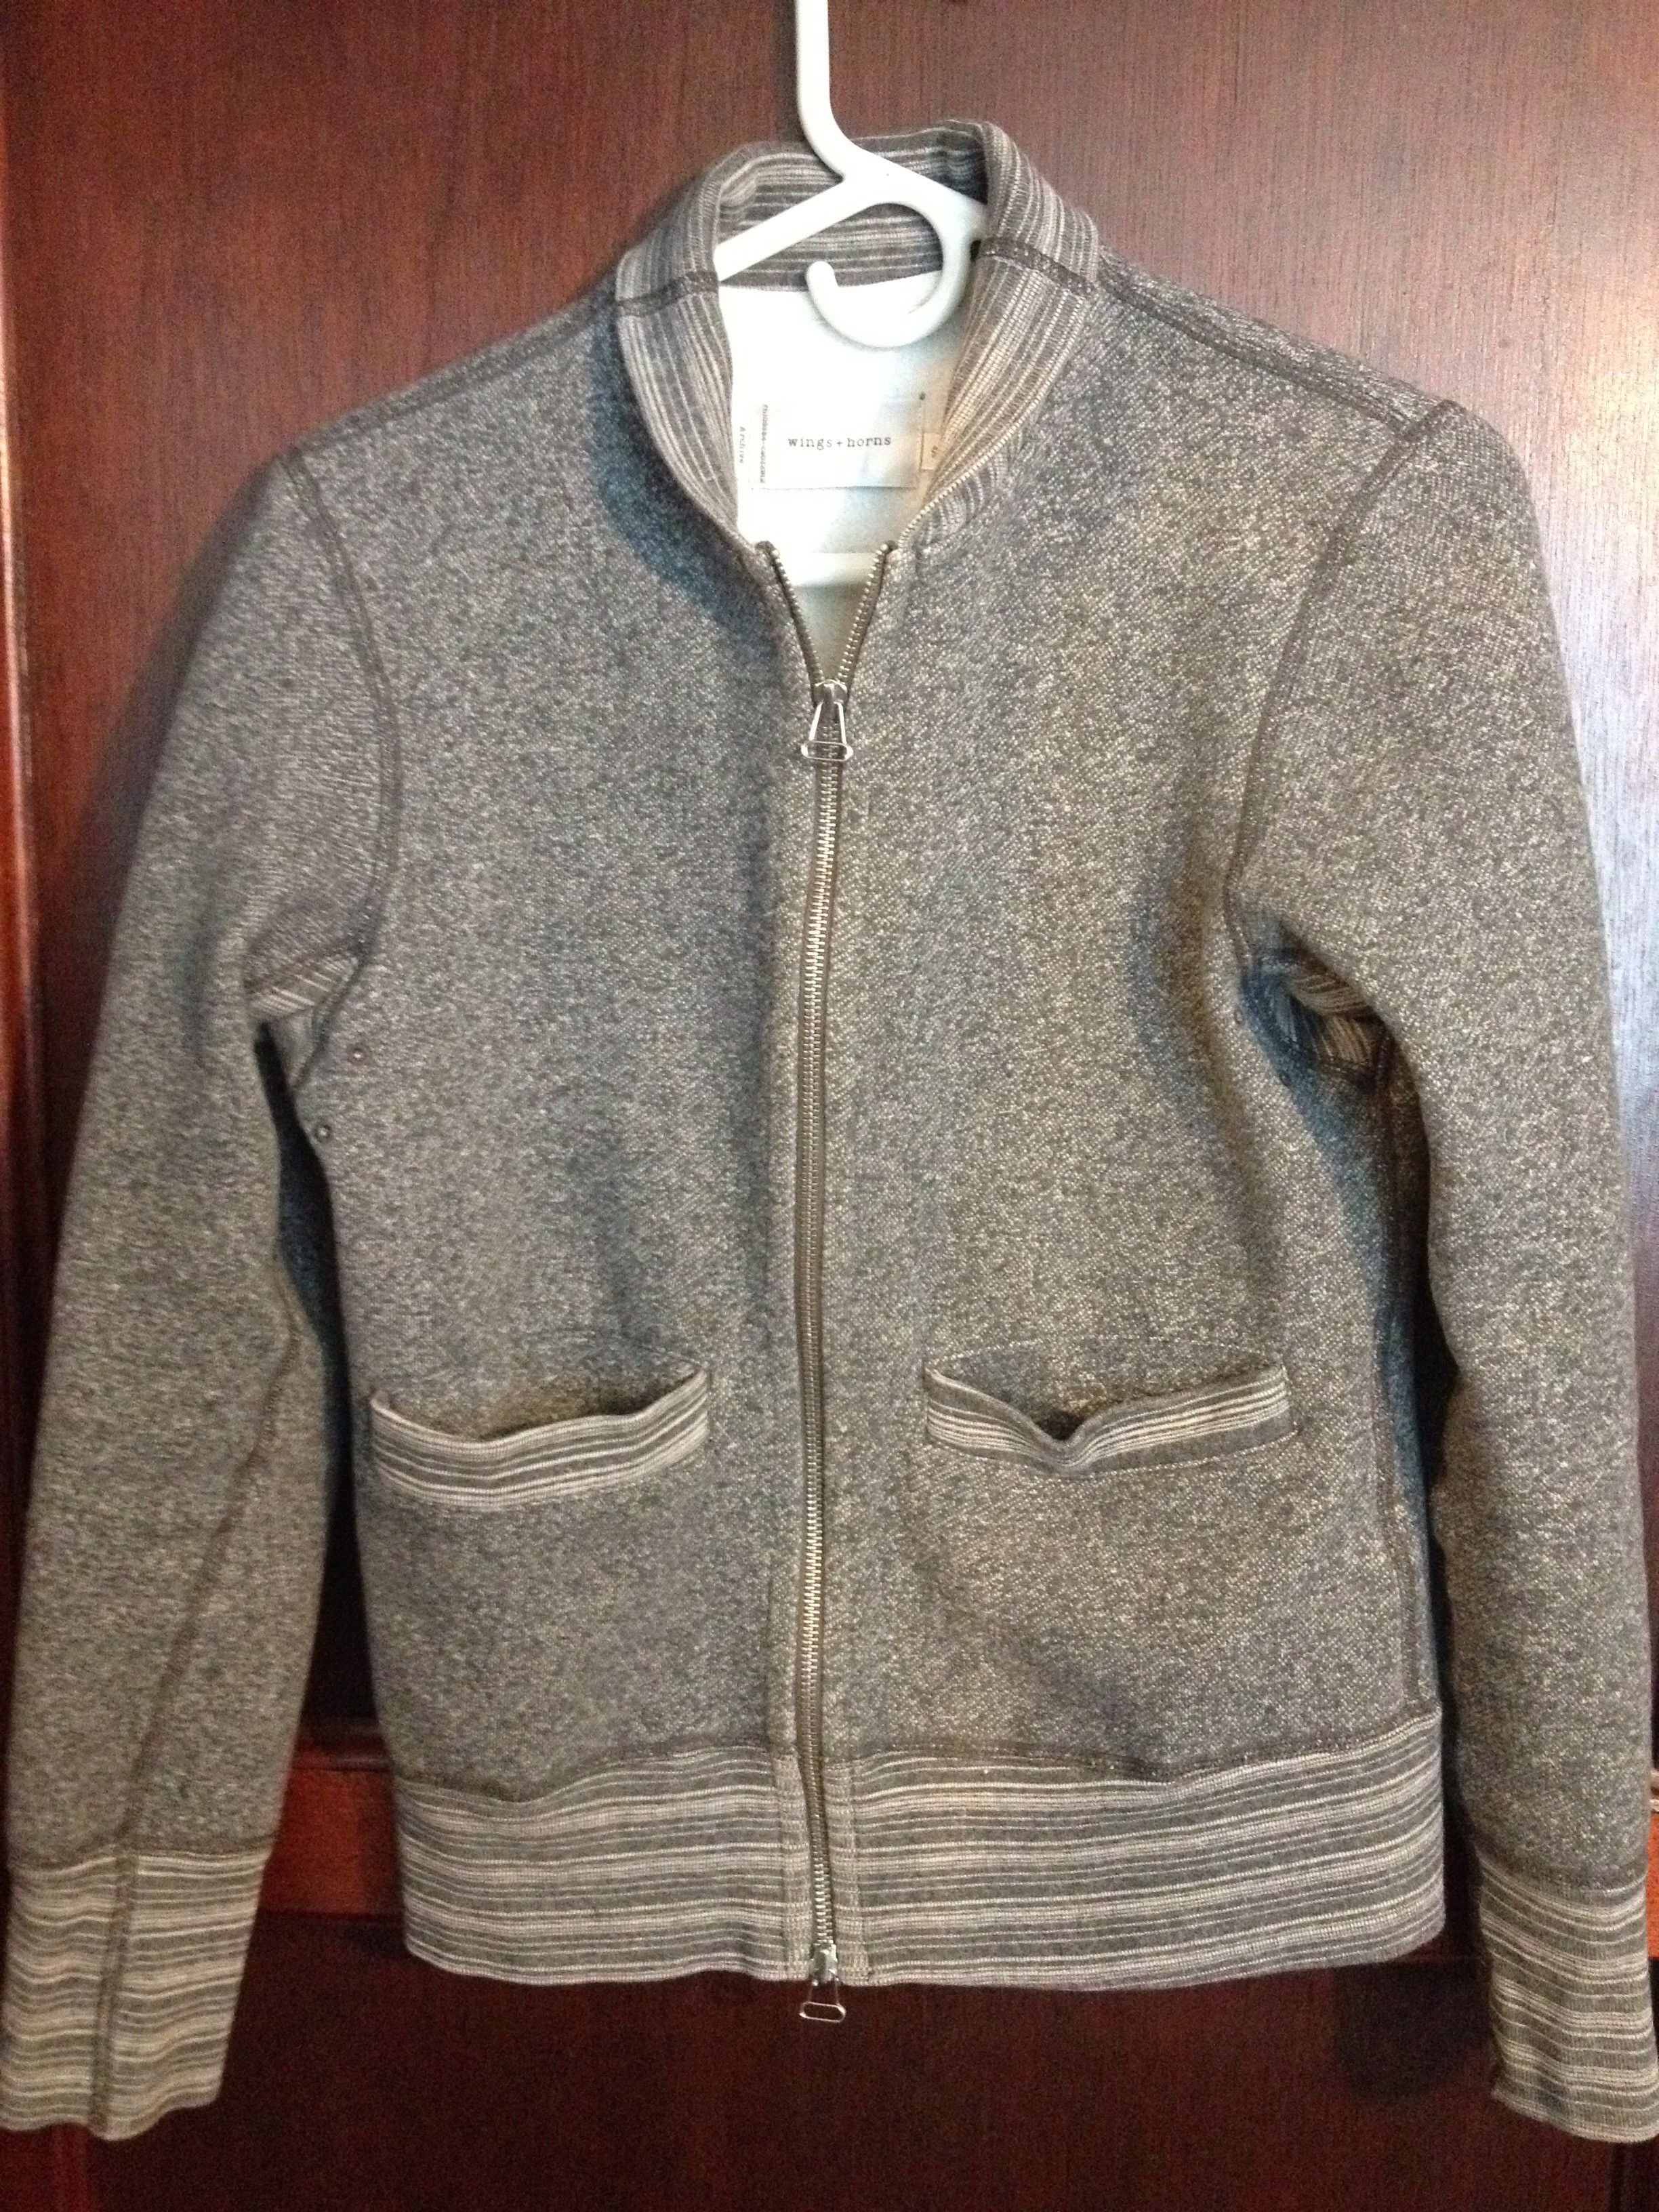 Wings + Horns Tiger Fleece Bomber/Cardigan Size US S / EU 44-46 / 1 - 1 Preview